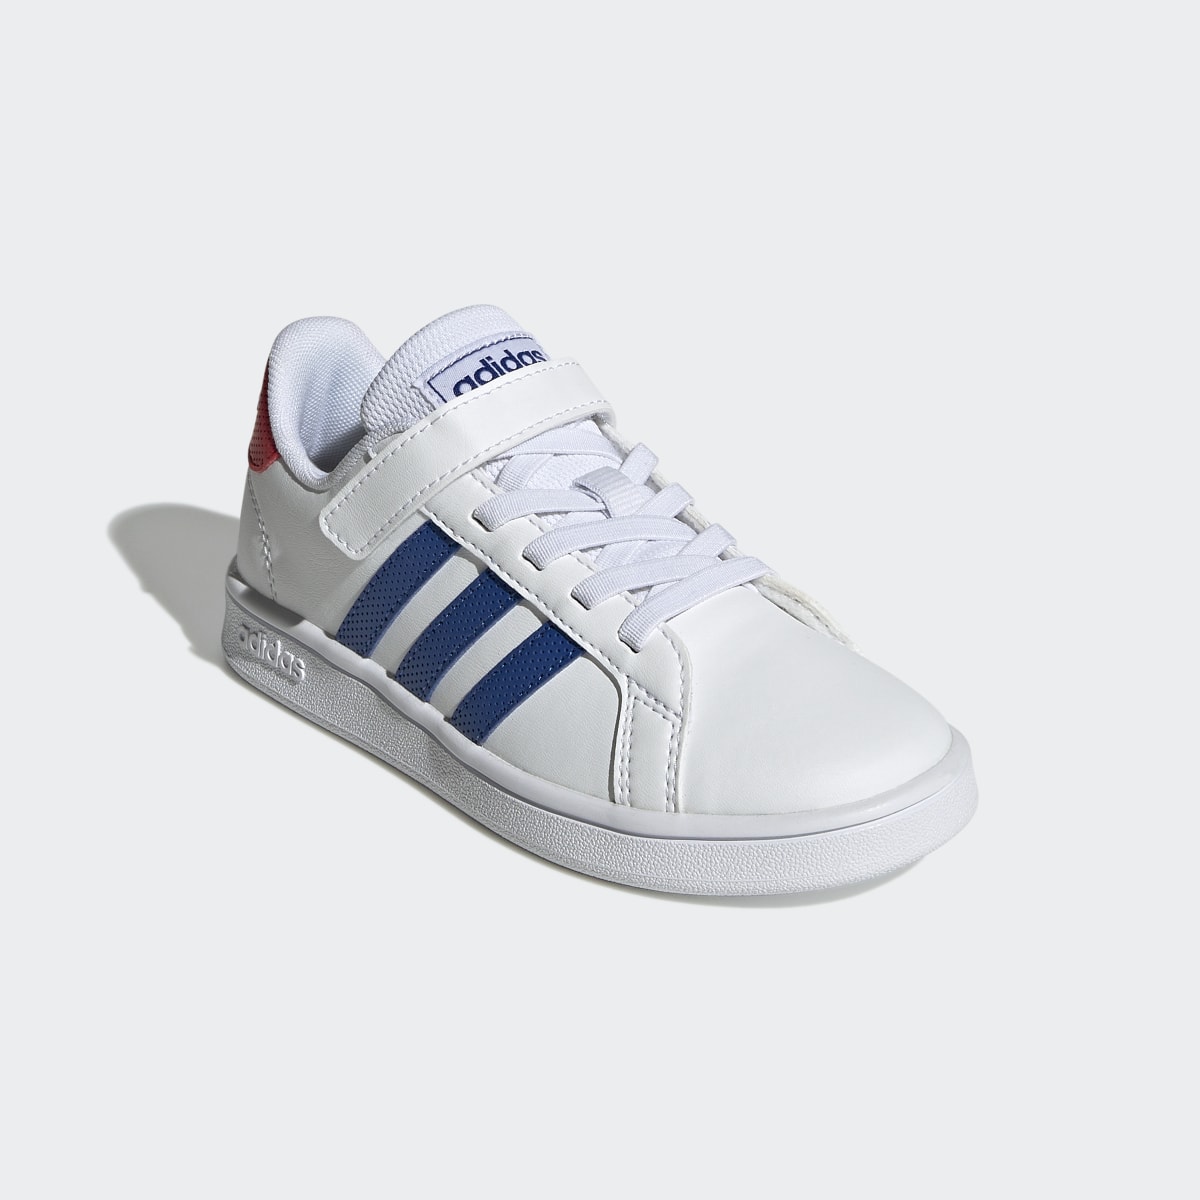 Adidas Grand Court Shoes. 5